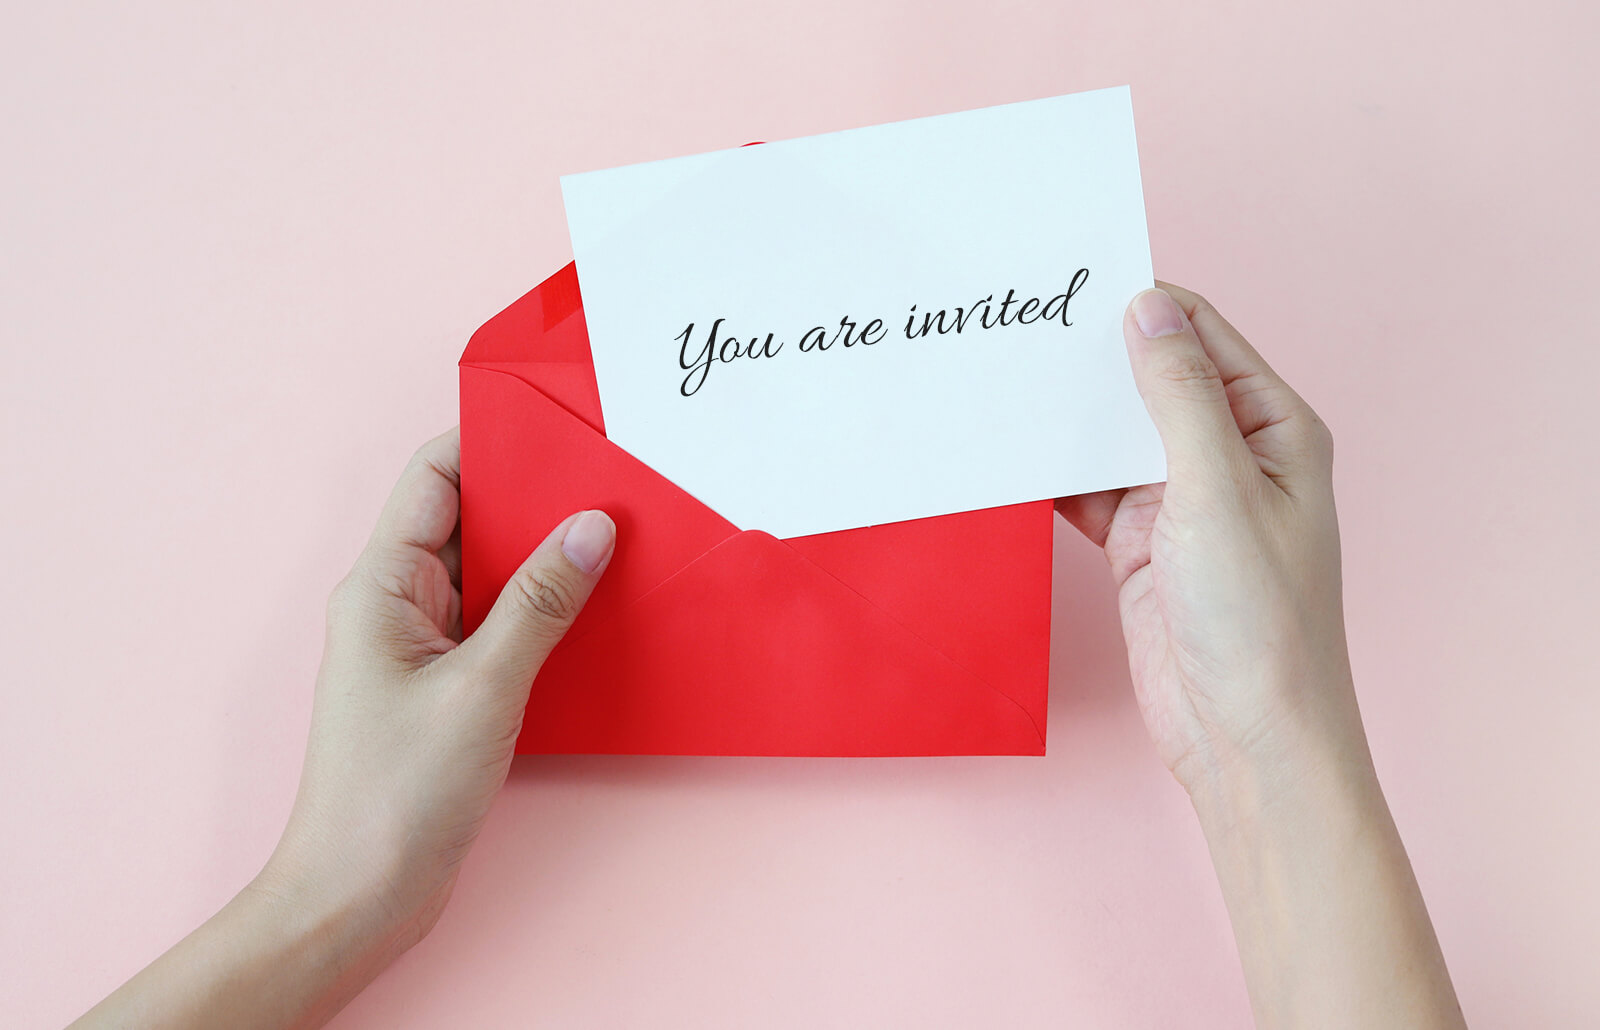 How you can plan for your dinner party invitation